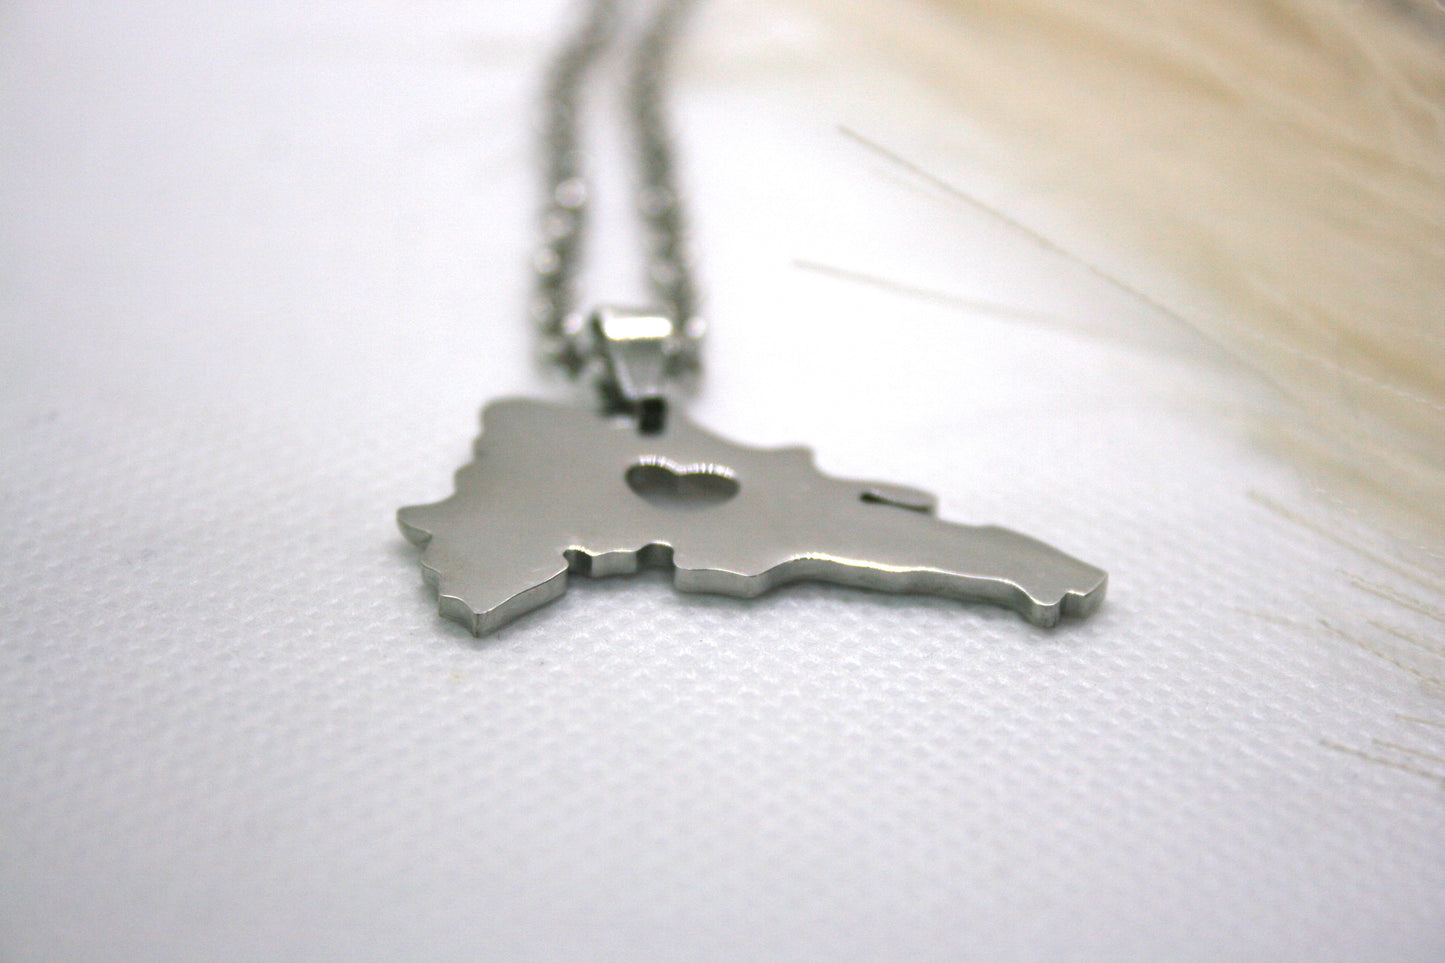 Travel Necklace